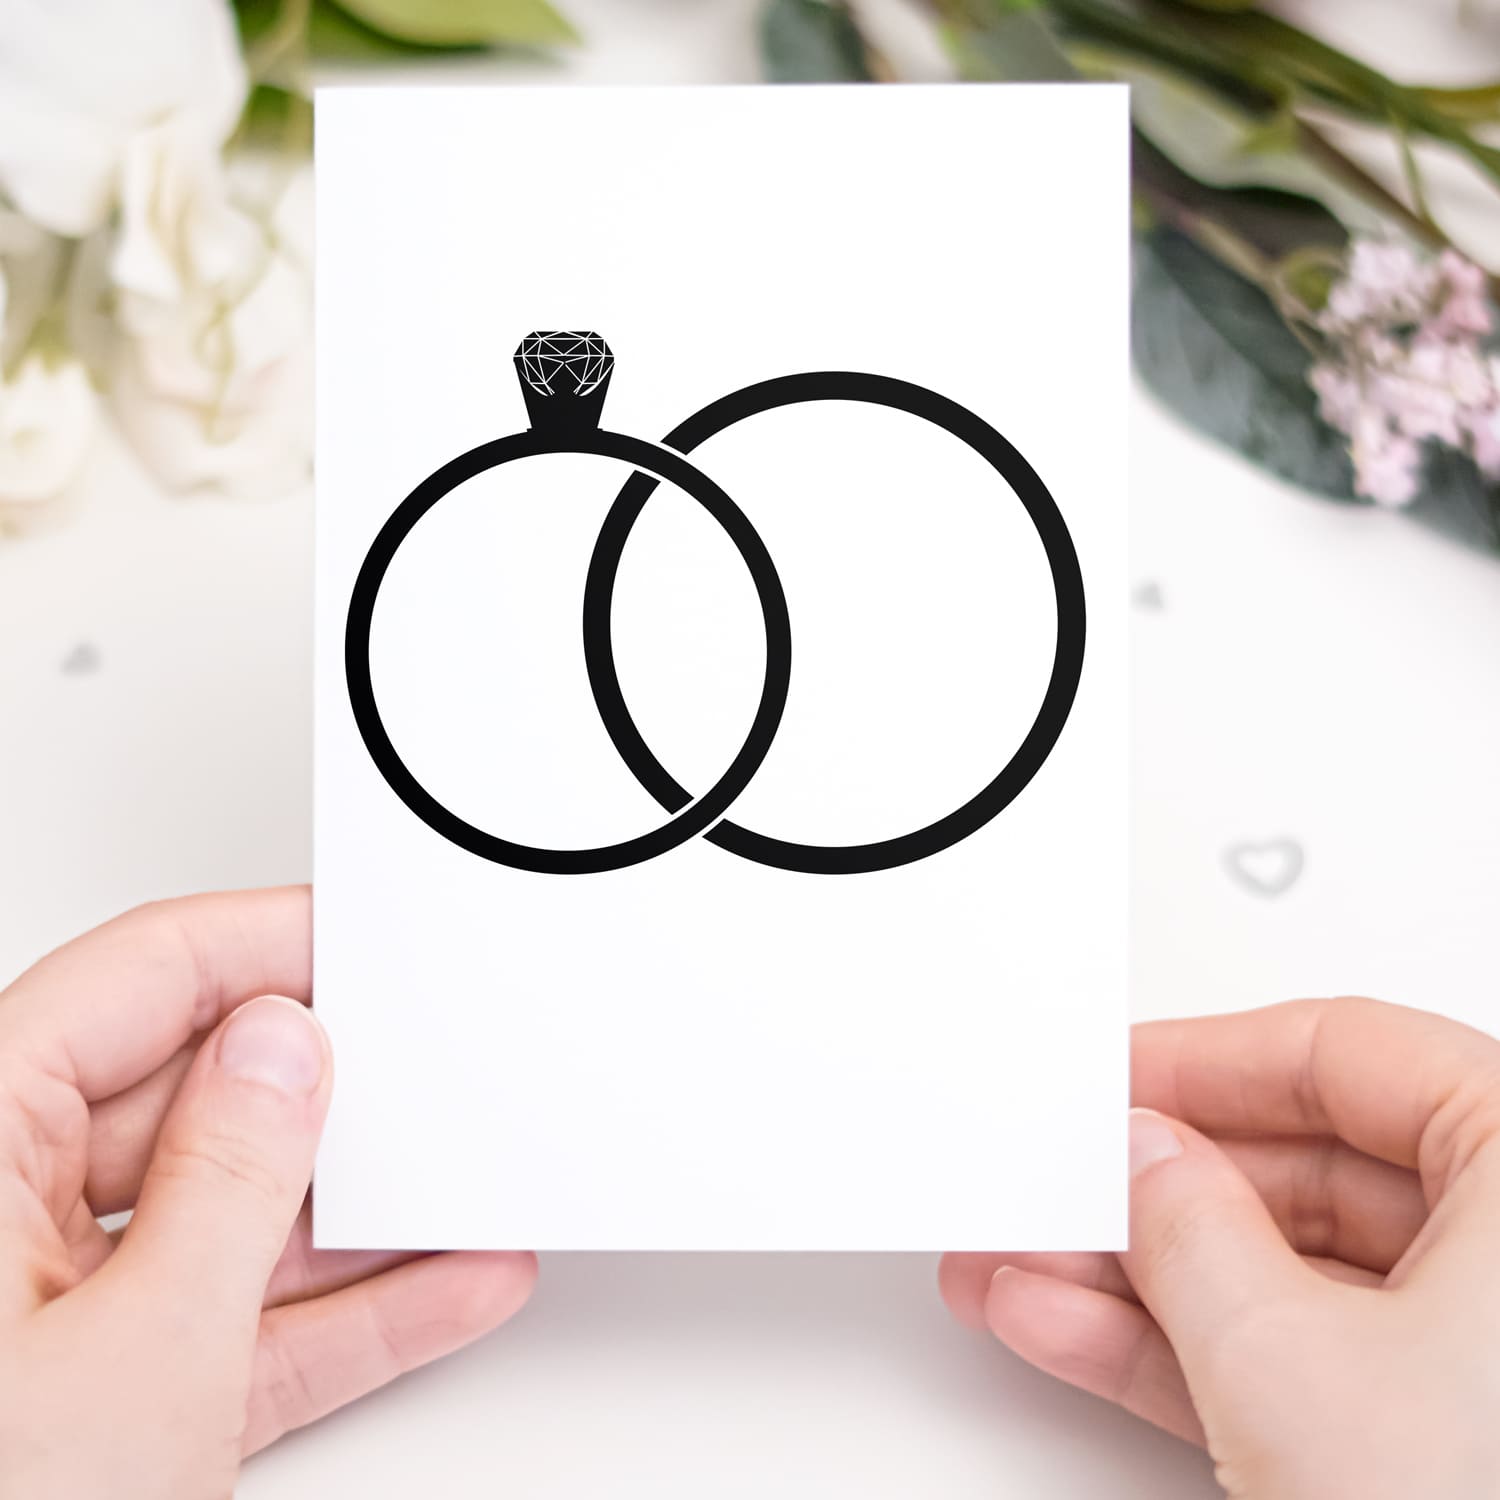 Silhouette Wedding Ring SVG drawn on the paper.